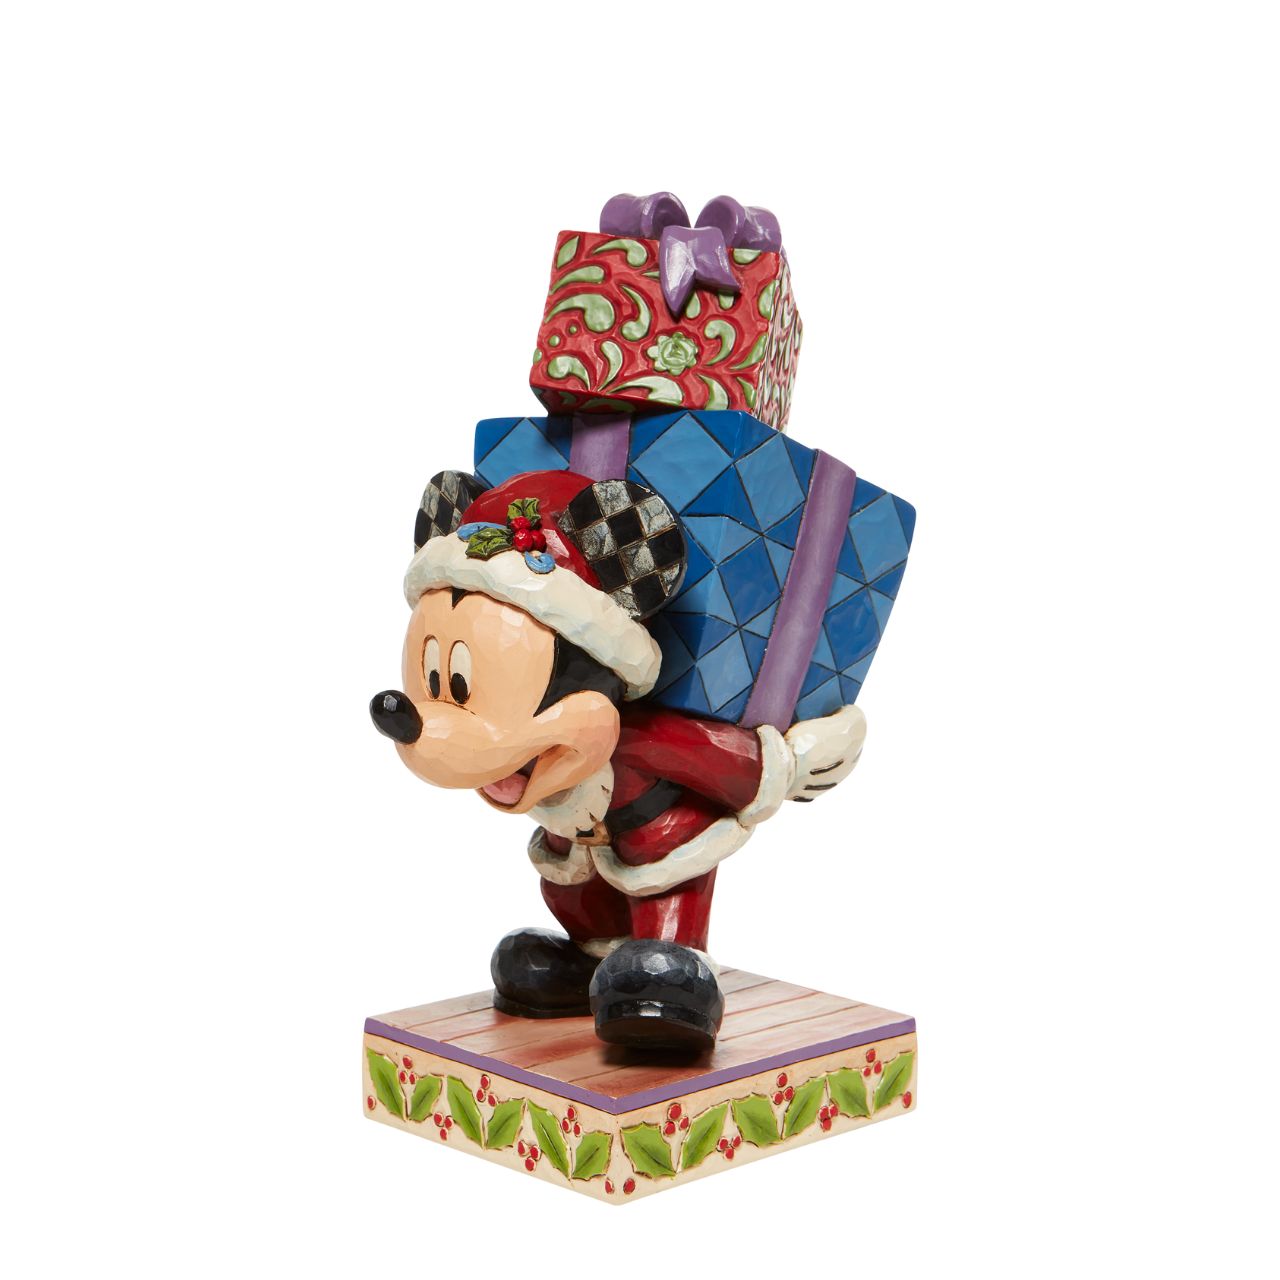 Jim Shore Here Comes Old St. Mick - Disney Mickey Carrying Gifts Figurine  There is a creature stirring in the house - and it's a mouse Dressed as Santa Claus and carrying a stack of presents, Mickey delivers holiday cheer and jolly jingles wherever he goes. 